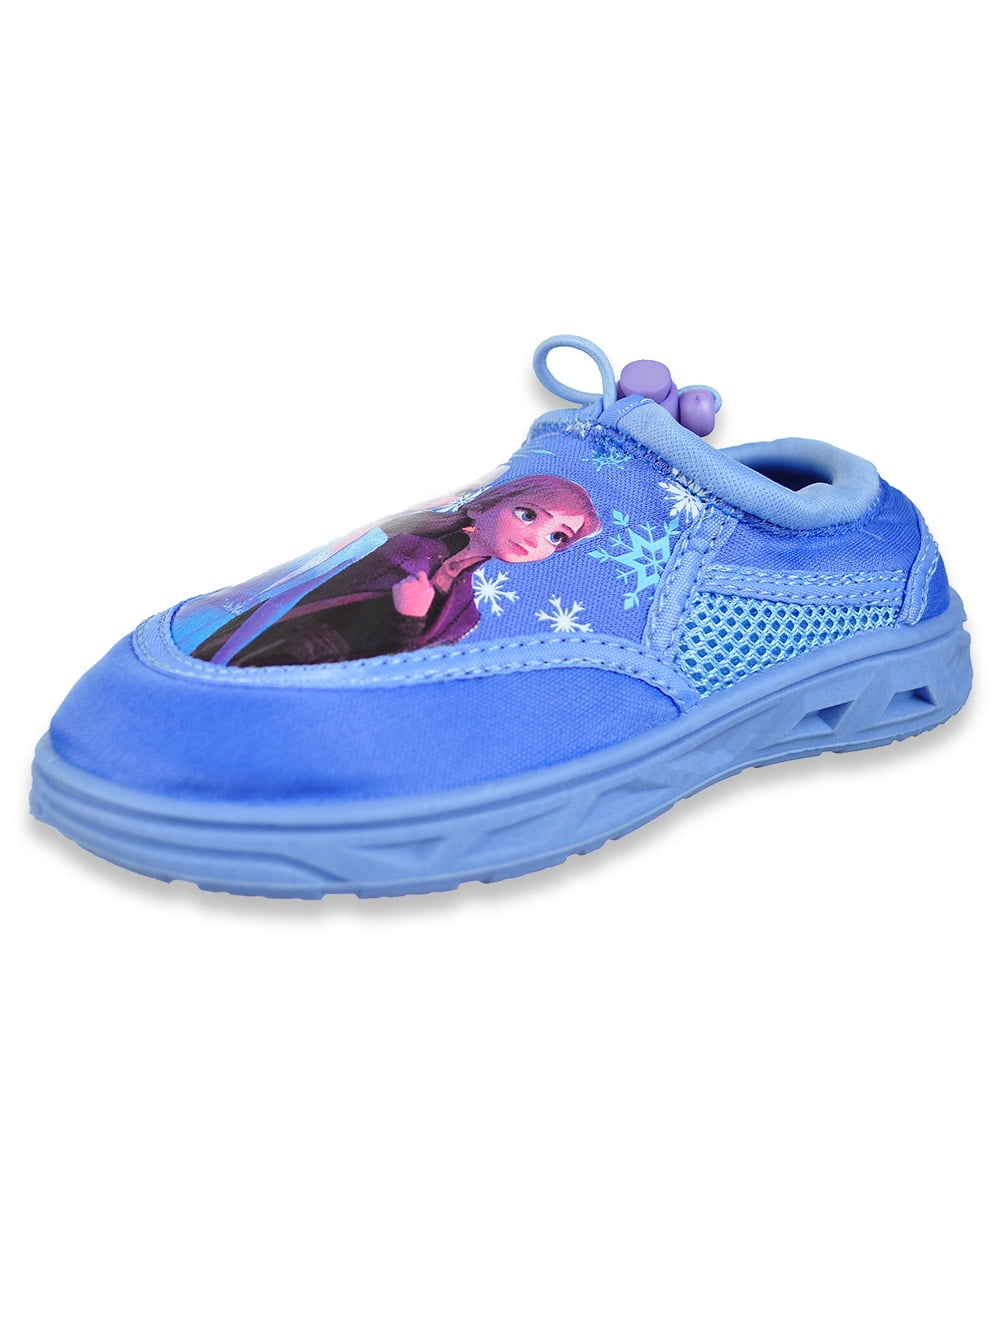 SIZE 11/12 GIRLS NEWTZ WATER SHOES Details about   NEW 